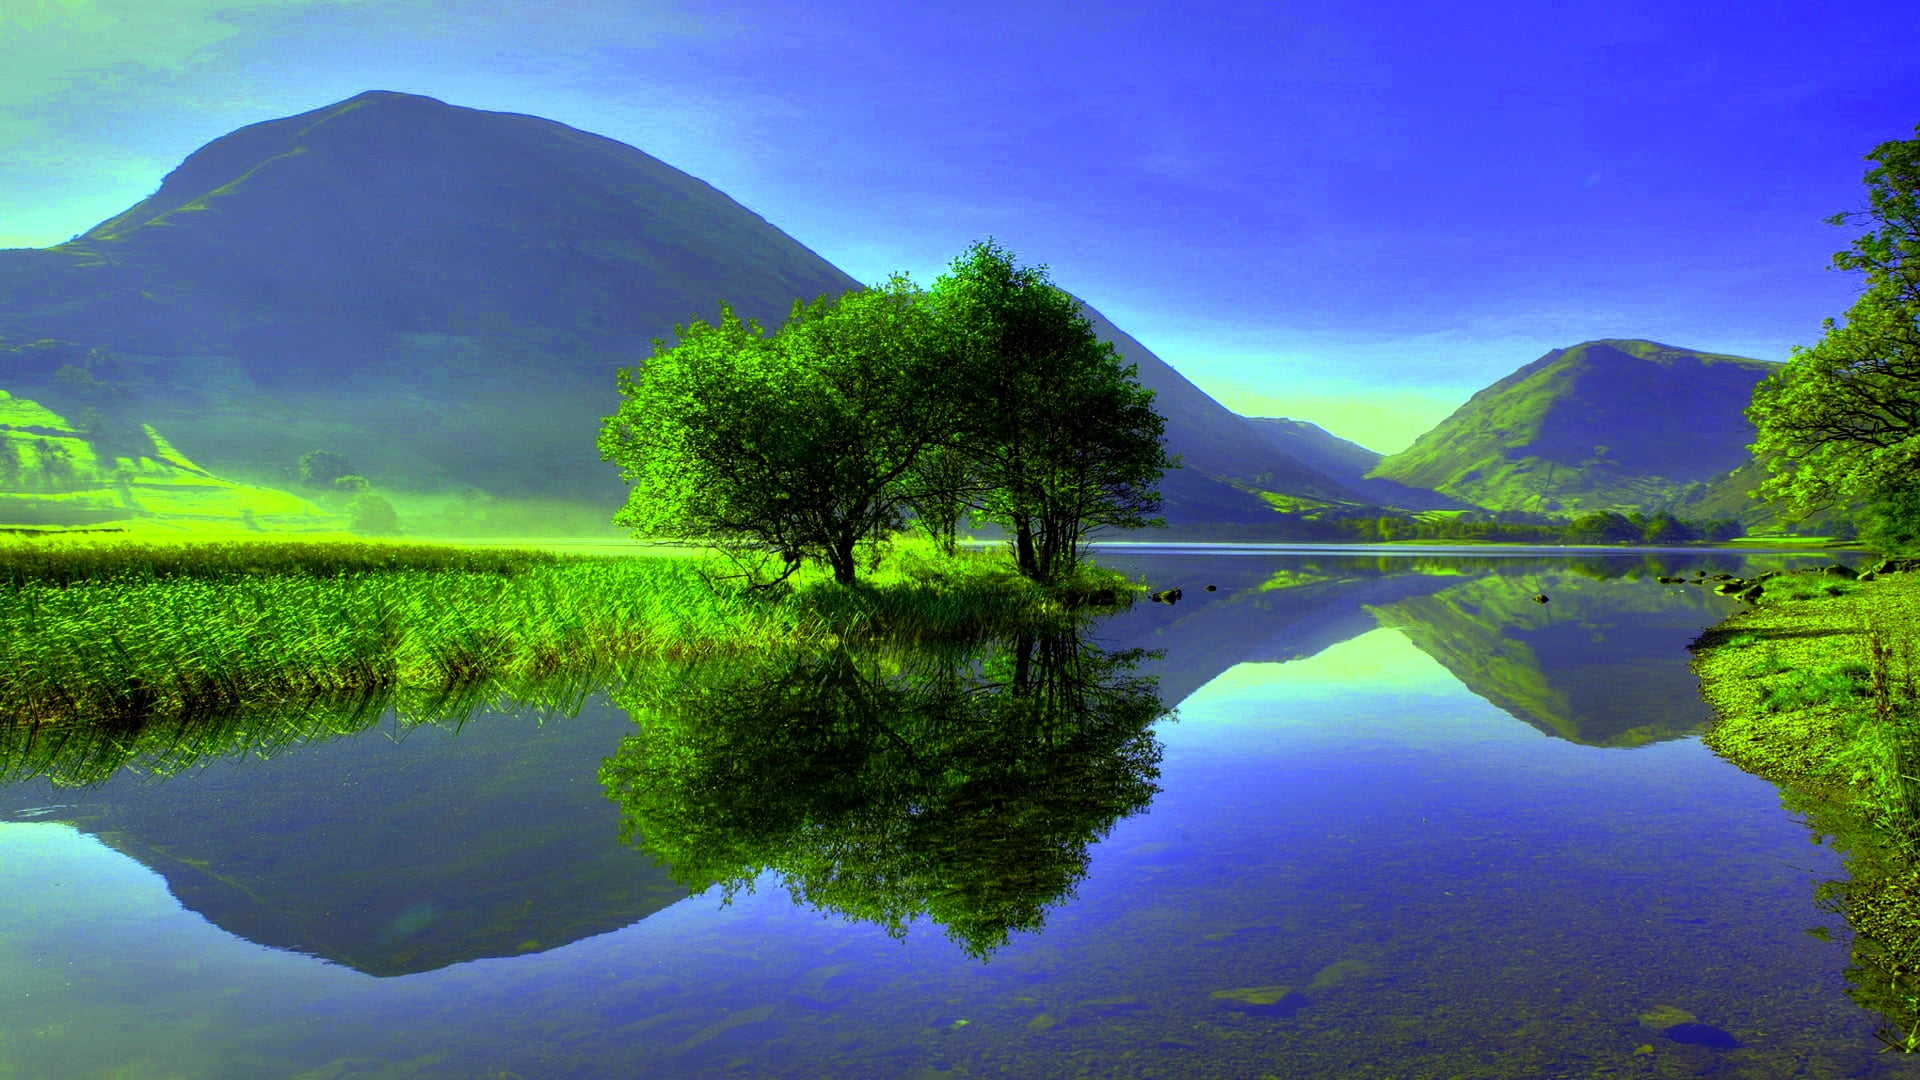 1920x1080 resolution | green tree, landscape, mountains, lake, clear ...